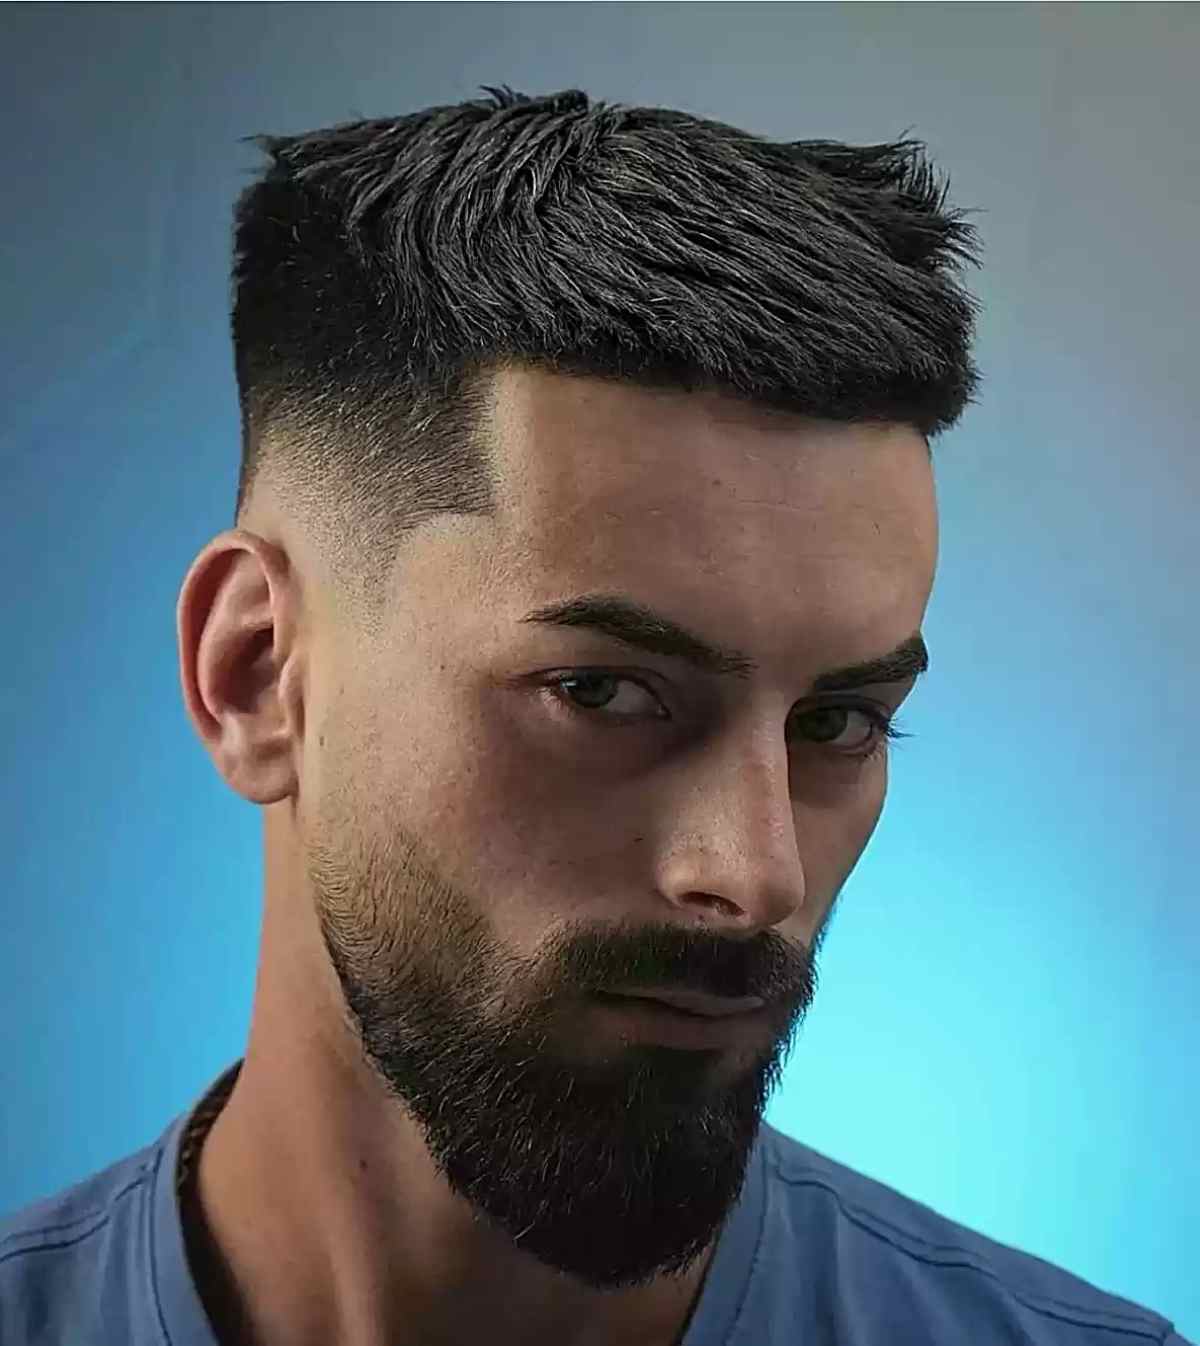 Men's Hairstyles For Short Hair: Best Of 2016 | by Harry Pit | Medium